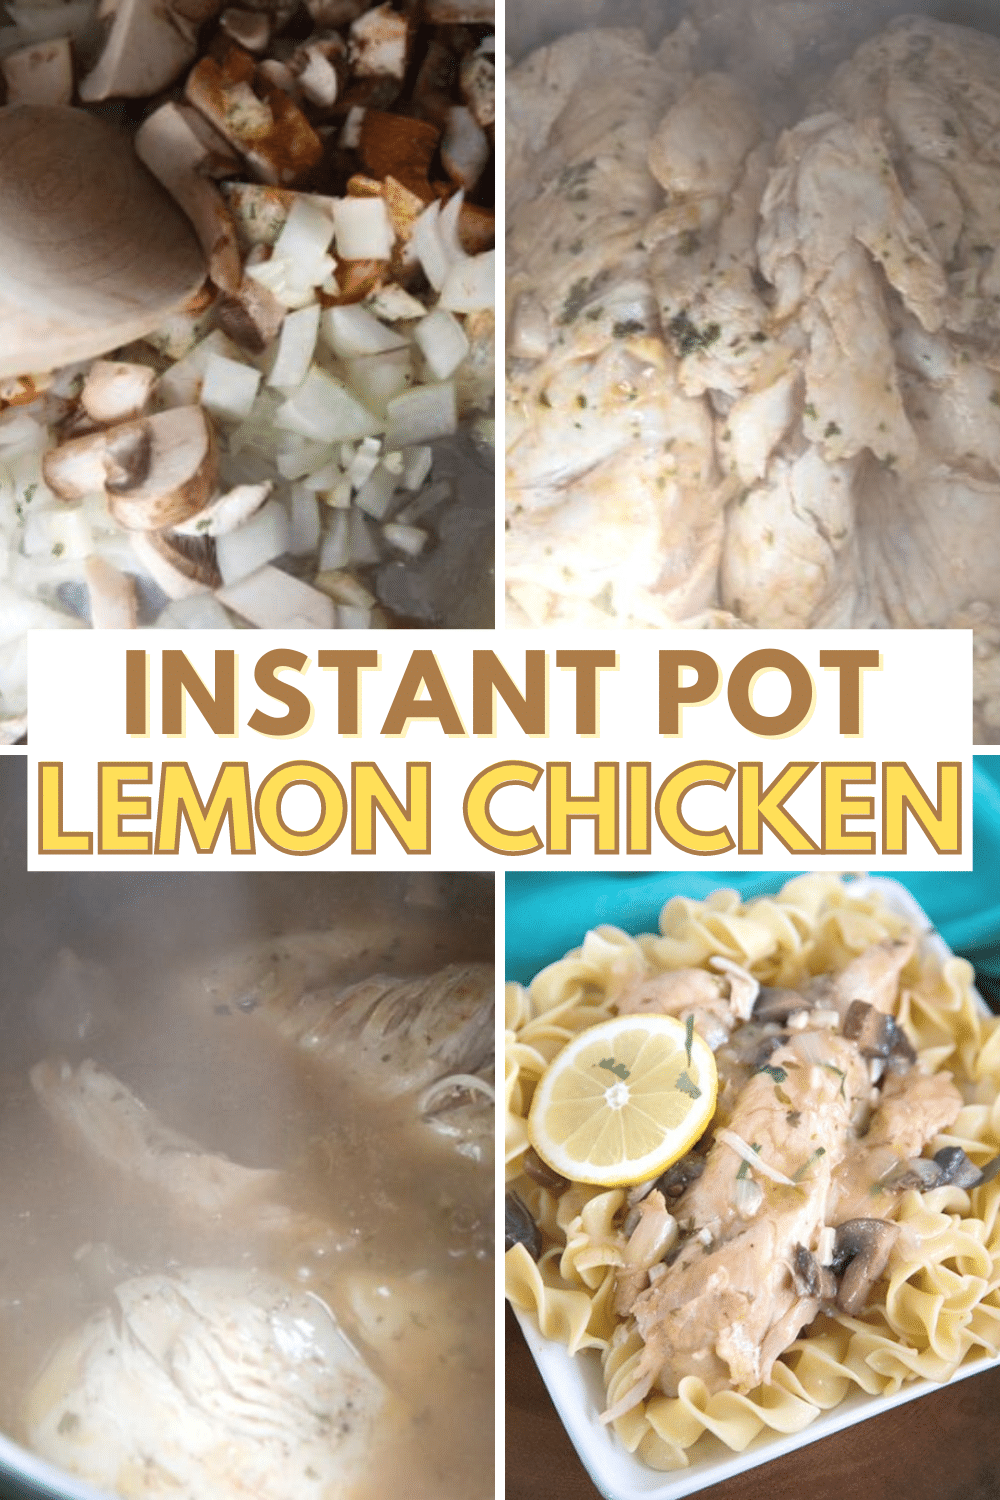 This Instant Pot Lemon Chicken is the perfect family-friendly dinner! Quick, simple, and just the right amount of lemon. #instantpot #pressurecooker #lemon #chicken #easydinner #wondermomwannabe via @wondermomwannab